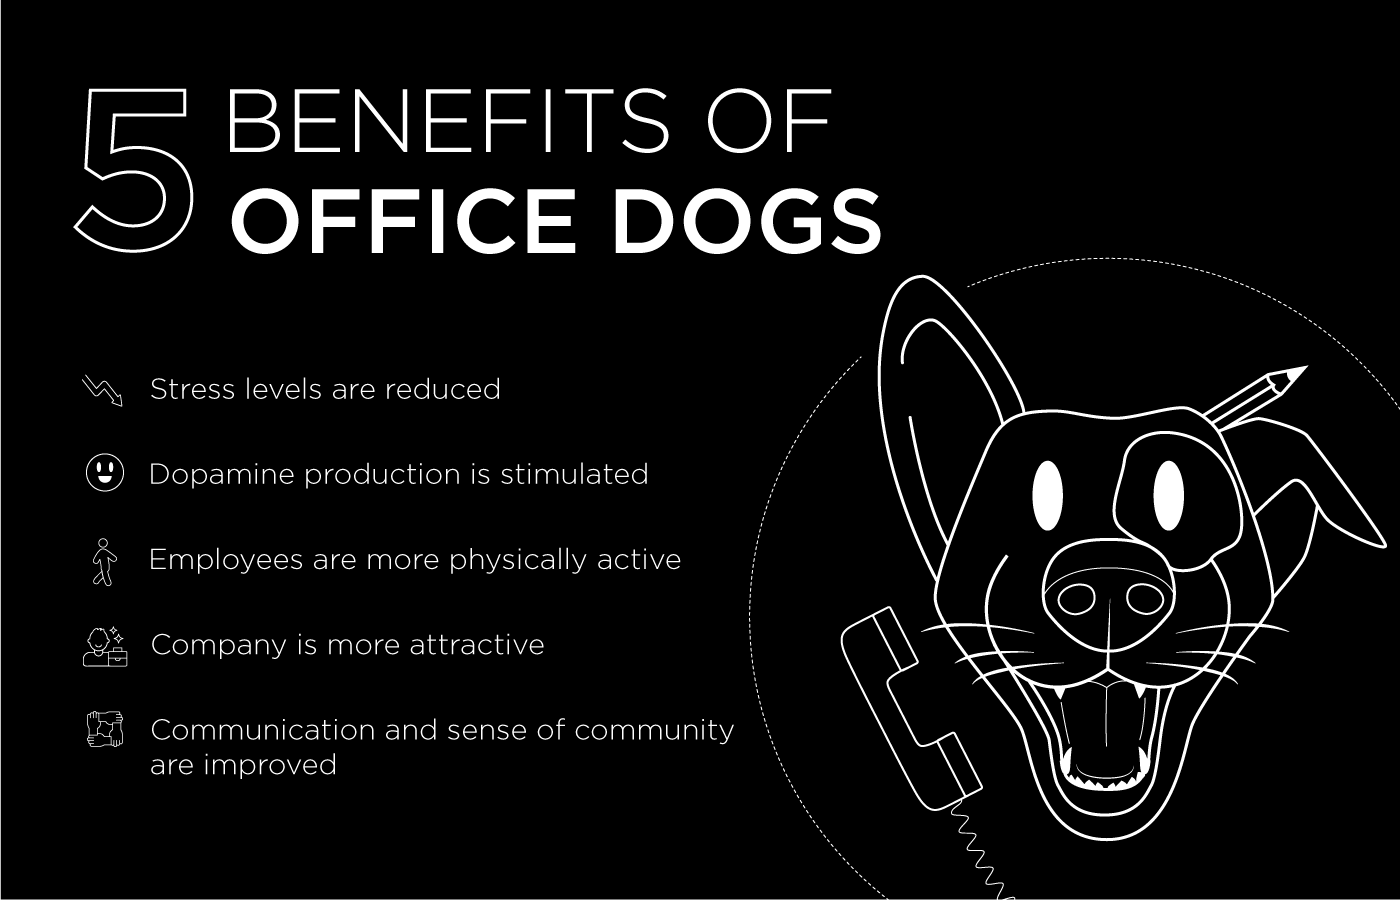 Five Reasons for Office Dogs